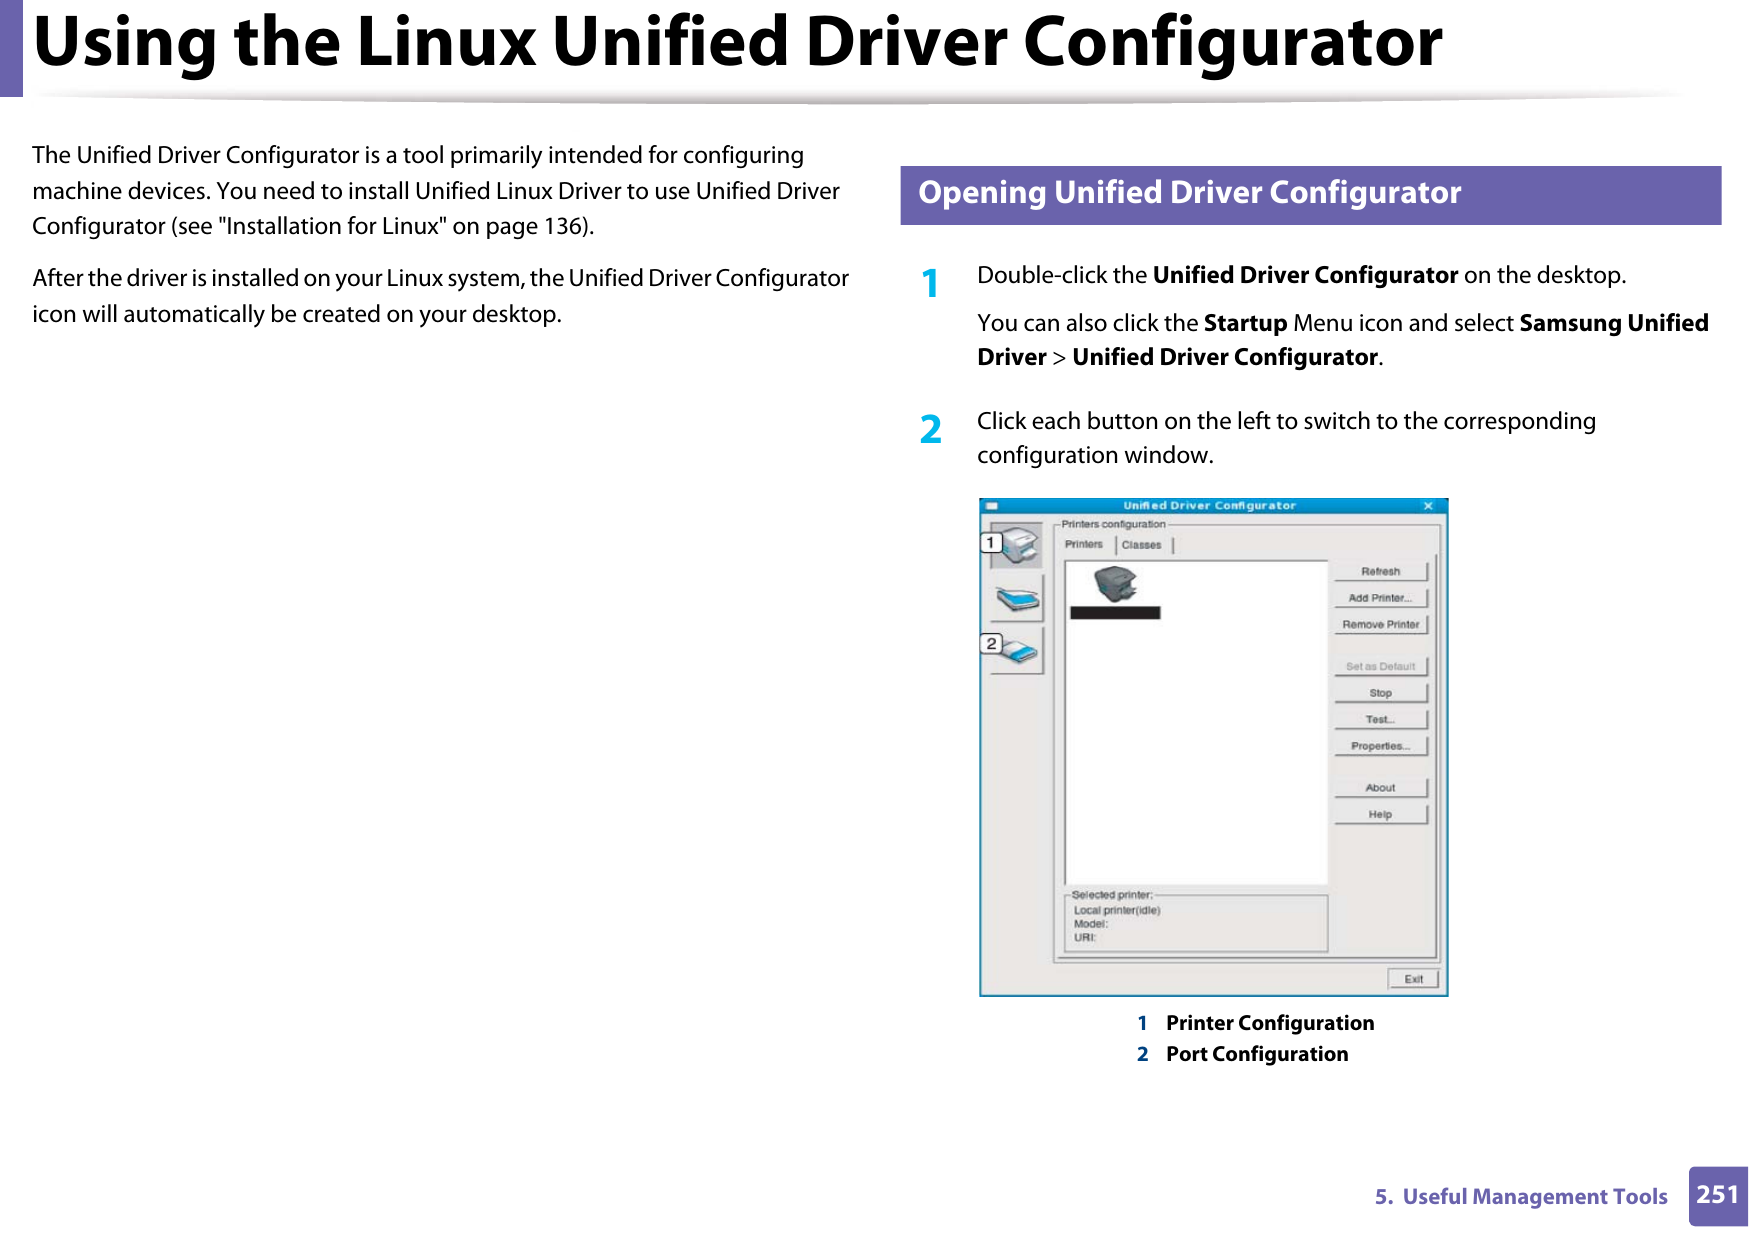 2515.  Useful Management ToolsUsing the Linux Unified Driver ConfiguratorThe Unified Driver Configurator is a tool primarily intended for configuring machine devices. You need to install Unified Linux Driver to use Unified Driver Configurator (see &quot;Installation for Linux&quot; on page 136).After the driver is installed on your Linux system, the Unified Driver Configurator icon will automatically be created on your desktop.12 Opening Unified Driver Configurator1Double-click the Unified Driver Configurator on the desktop.You can also click the Startup Menu icon and select Samsung Unified Driver &gt; Unified Driver Configurator.2  Click each button on the left to switch to the corresponding configuration window.1Printer Configuration 2Port Configuration 